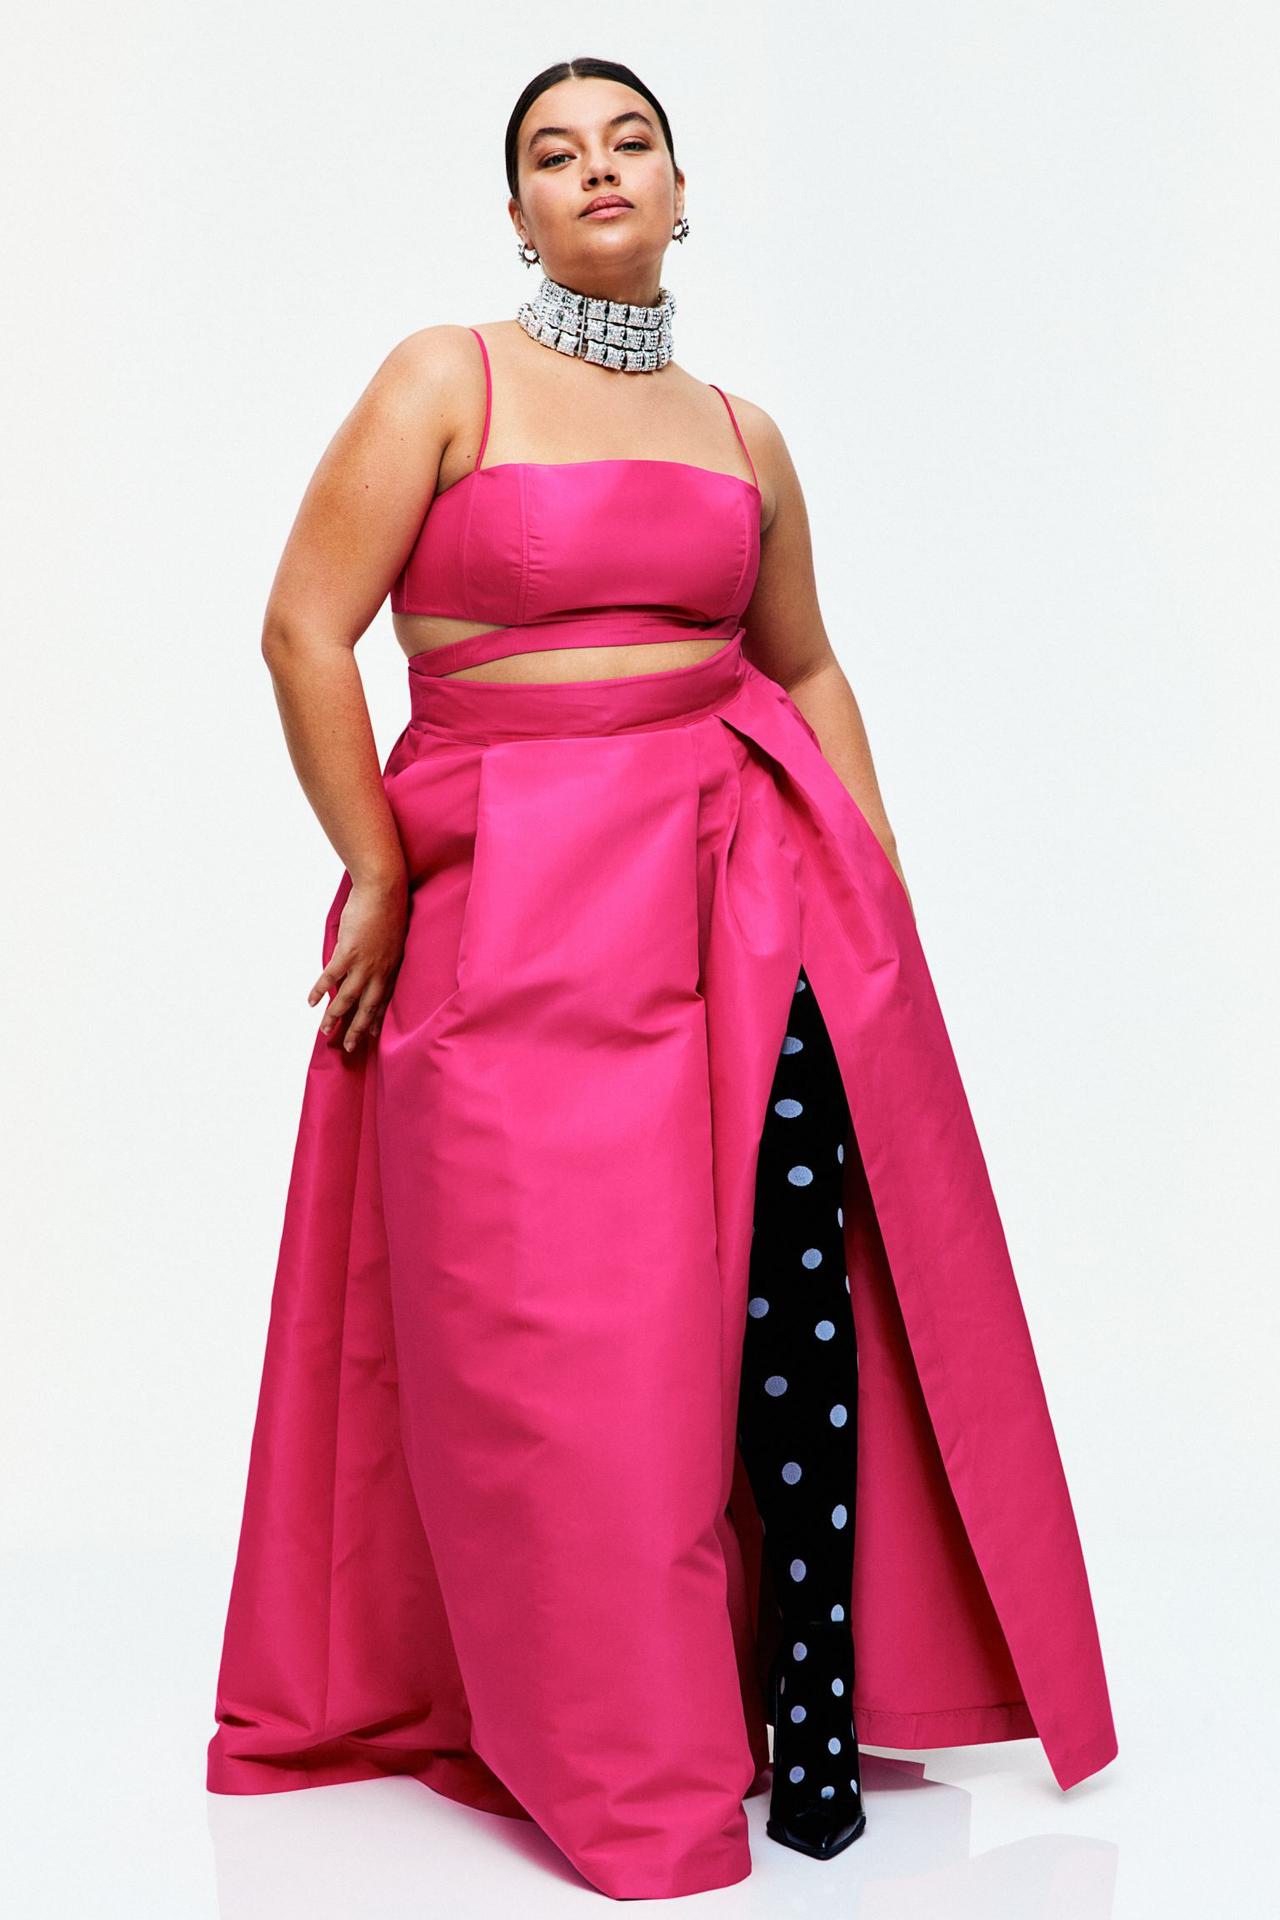 Hot Pink Dress Plus Size Photos, Download The BEST Free Hot Pink